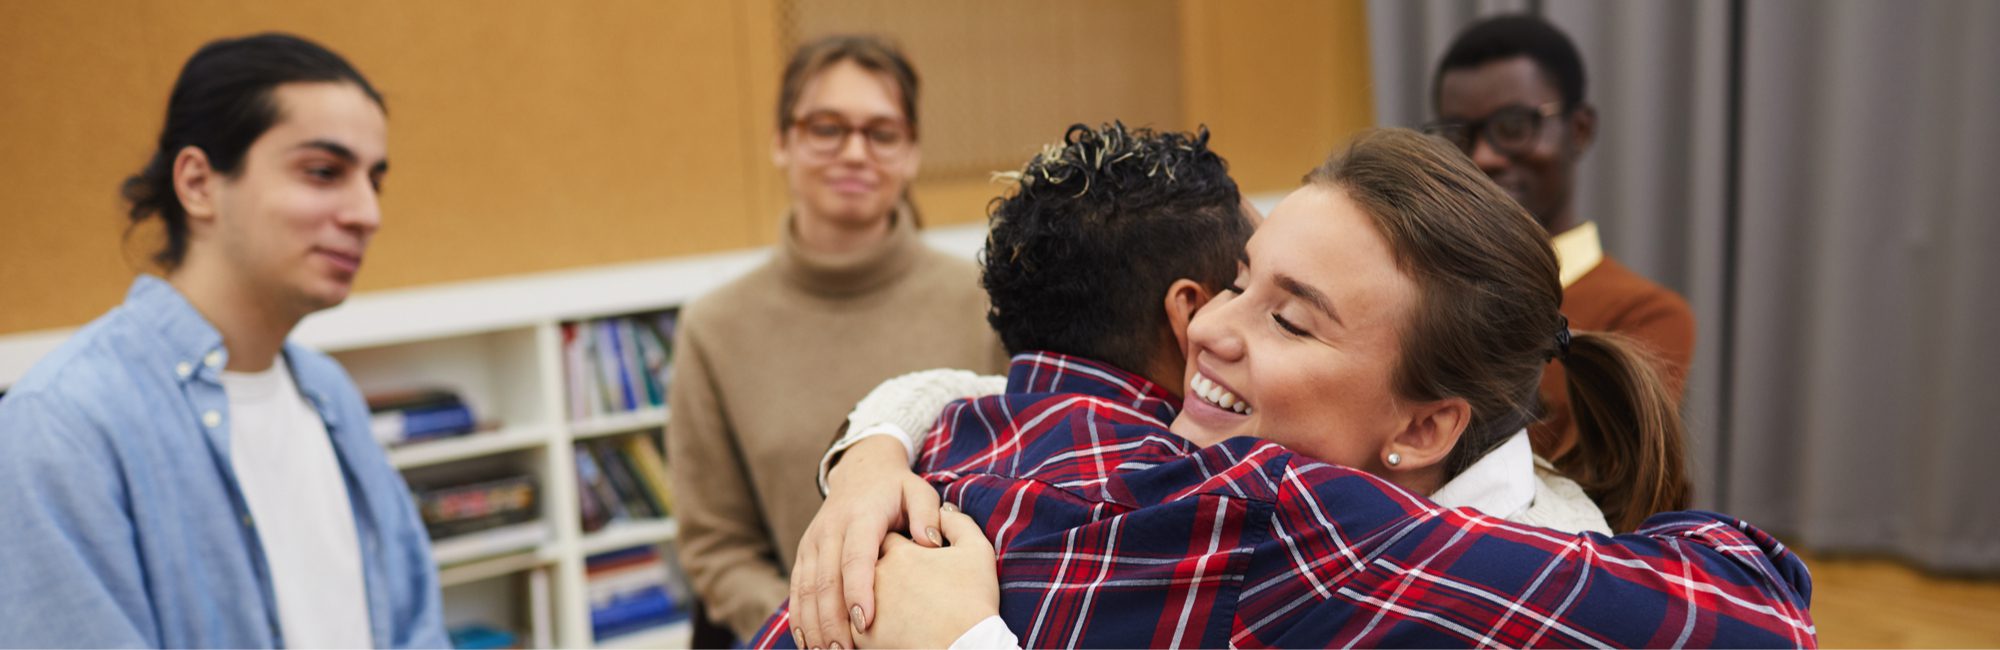 Portrait of two young women hugging in support group meeting, both smiling happily, copy space